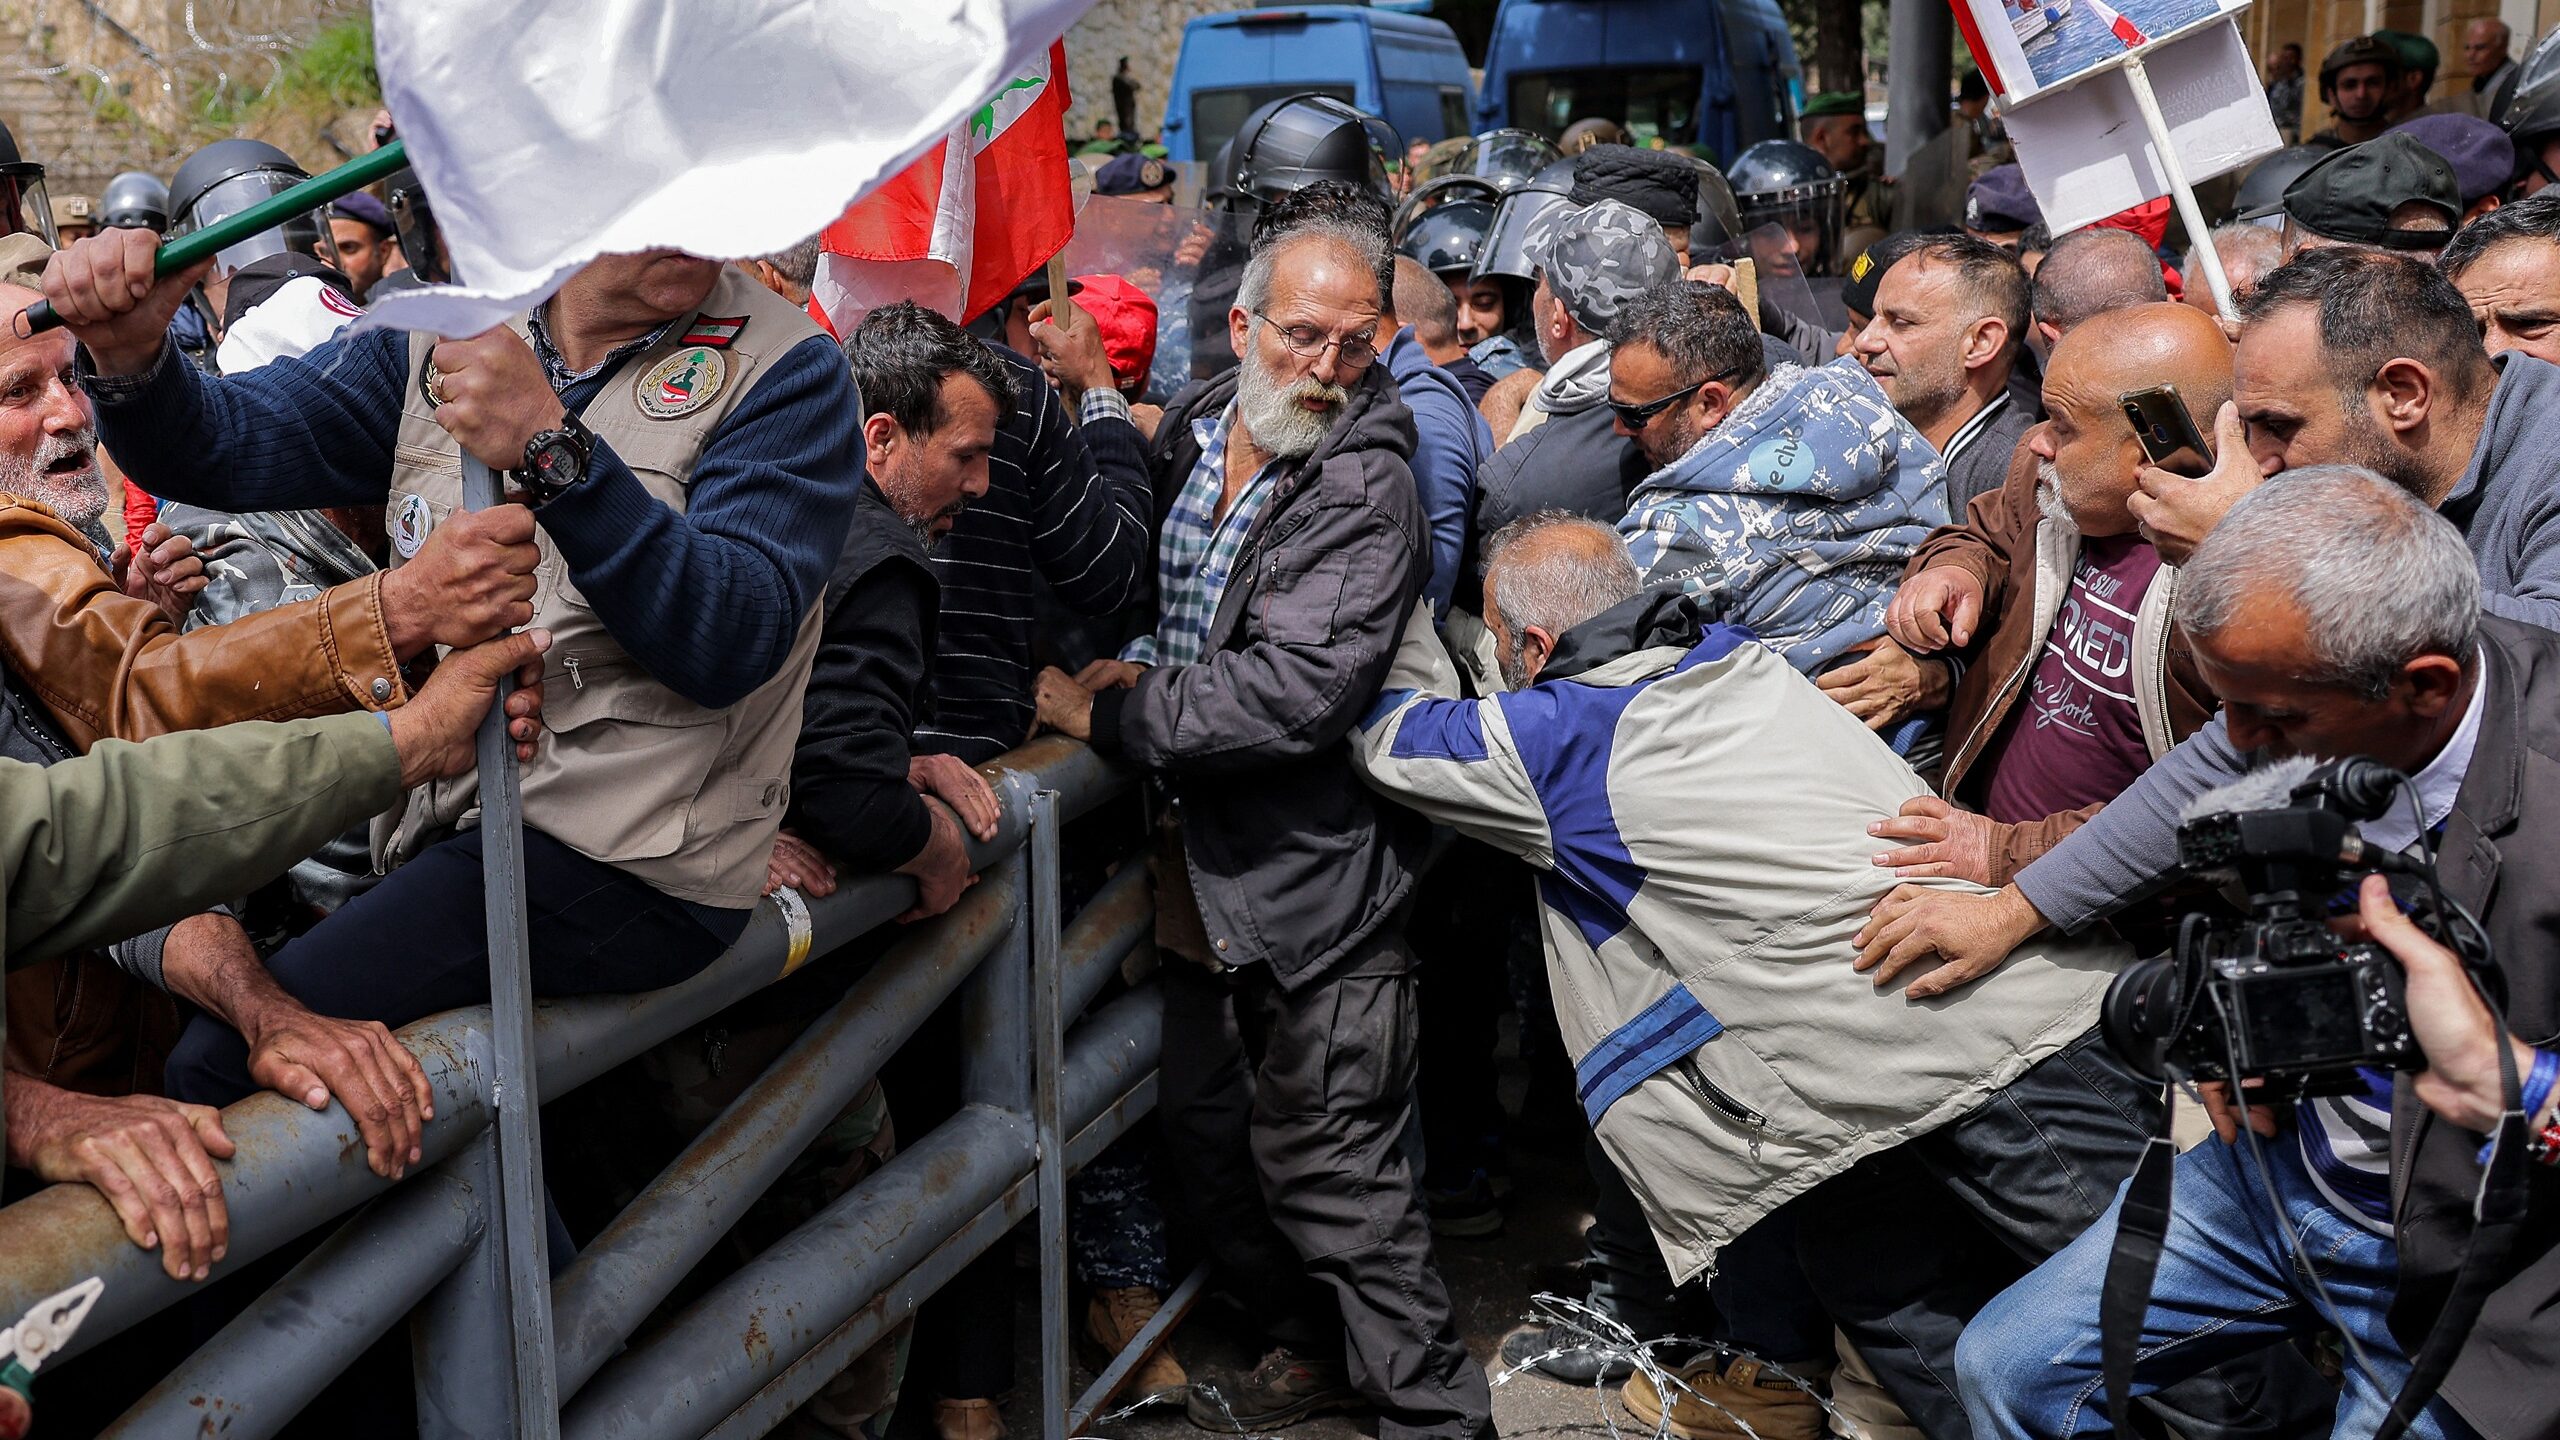 Lebanese Retired Soldiers Clash With Police in Protest Over Economic Woes